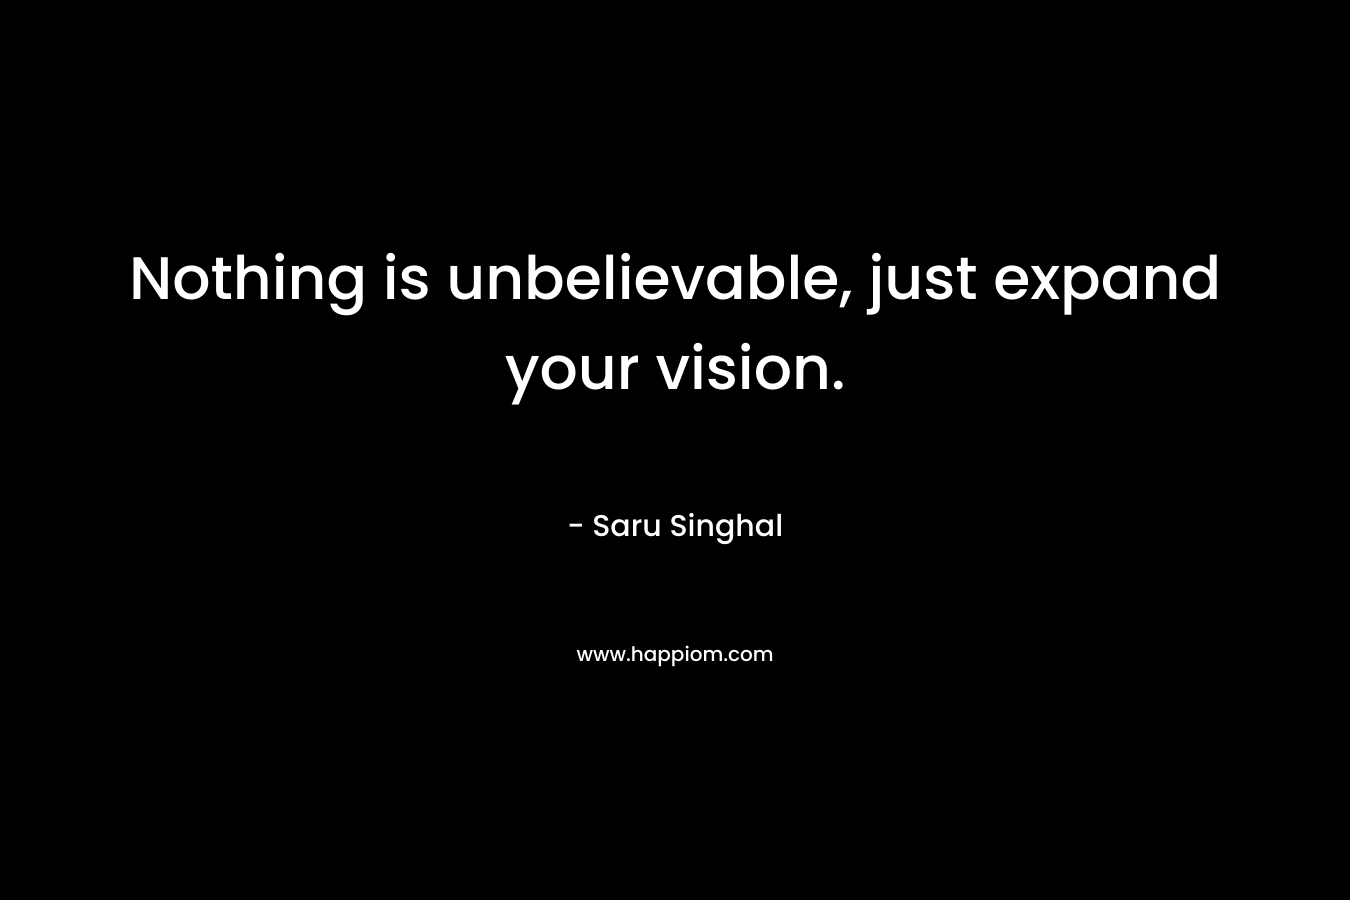 Nothing is unbelievable, just expand your vision.